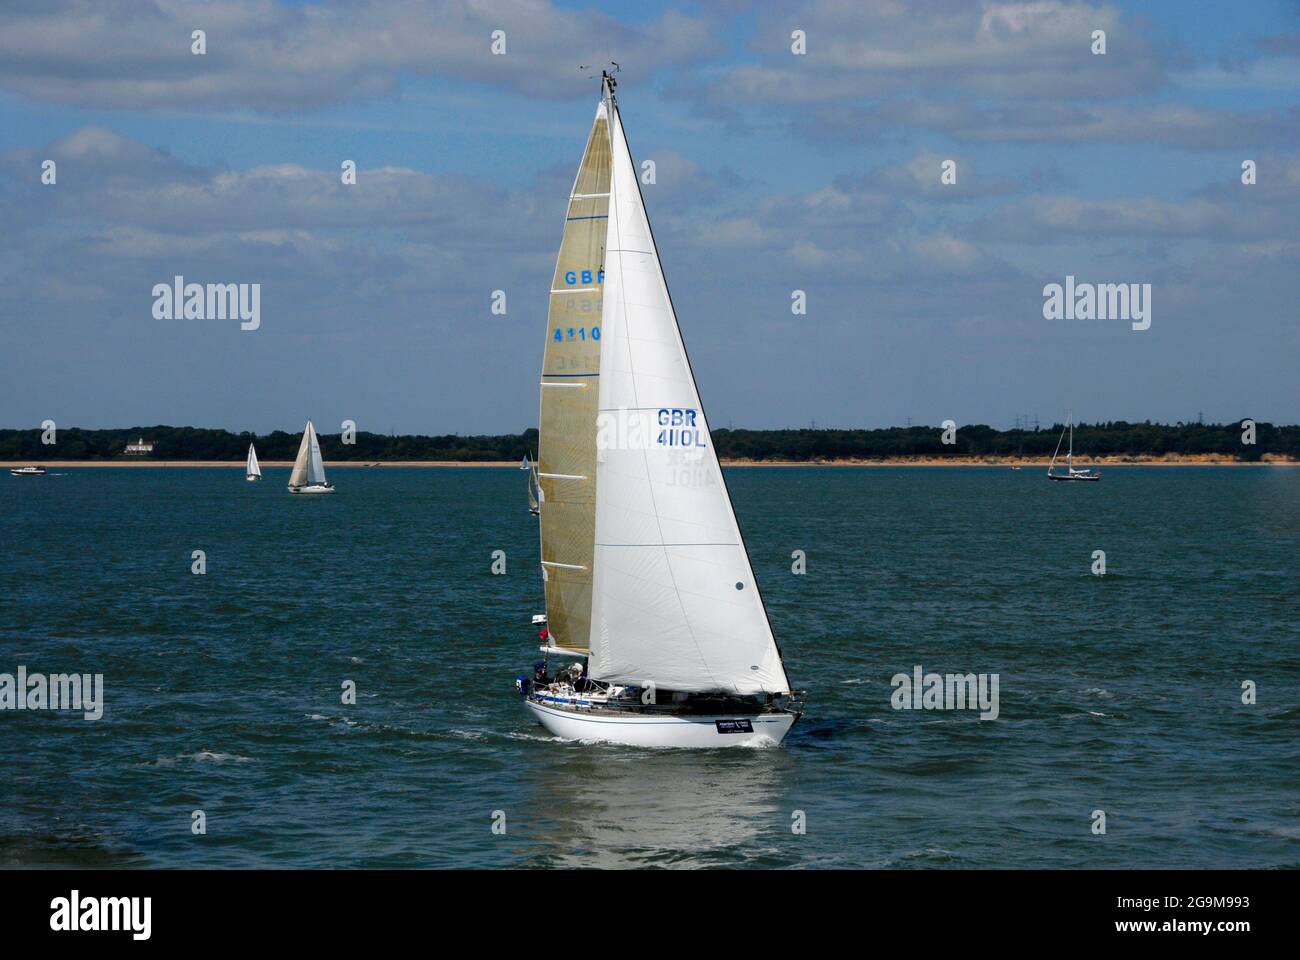 Yacht with gold-coloured mainsail sailing in Southampton Water during Cowes Week regatta, England Stock Photo